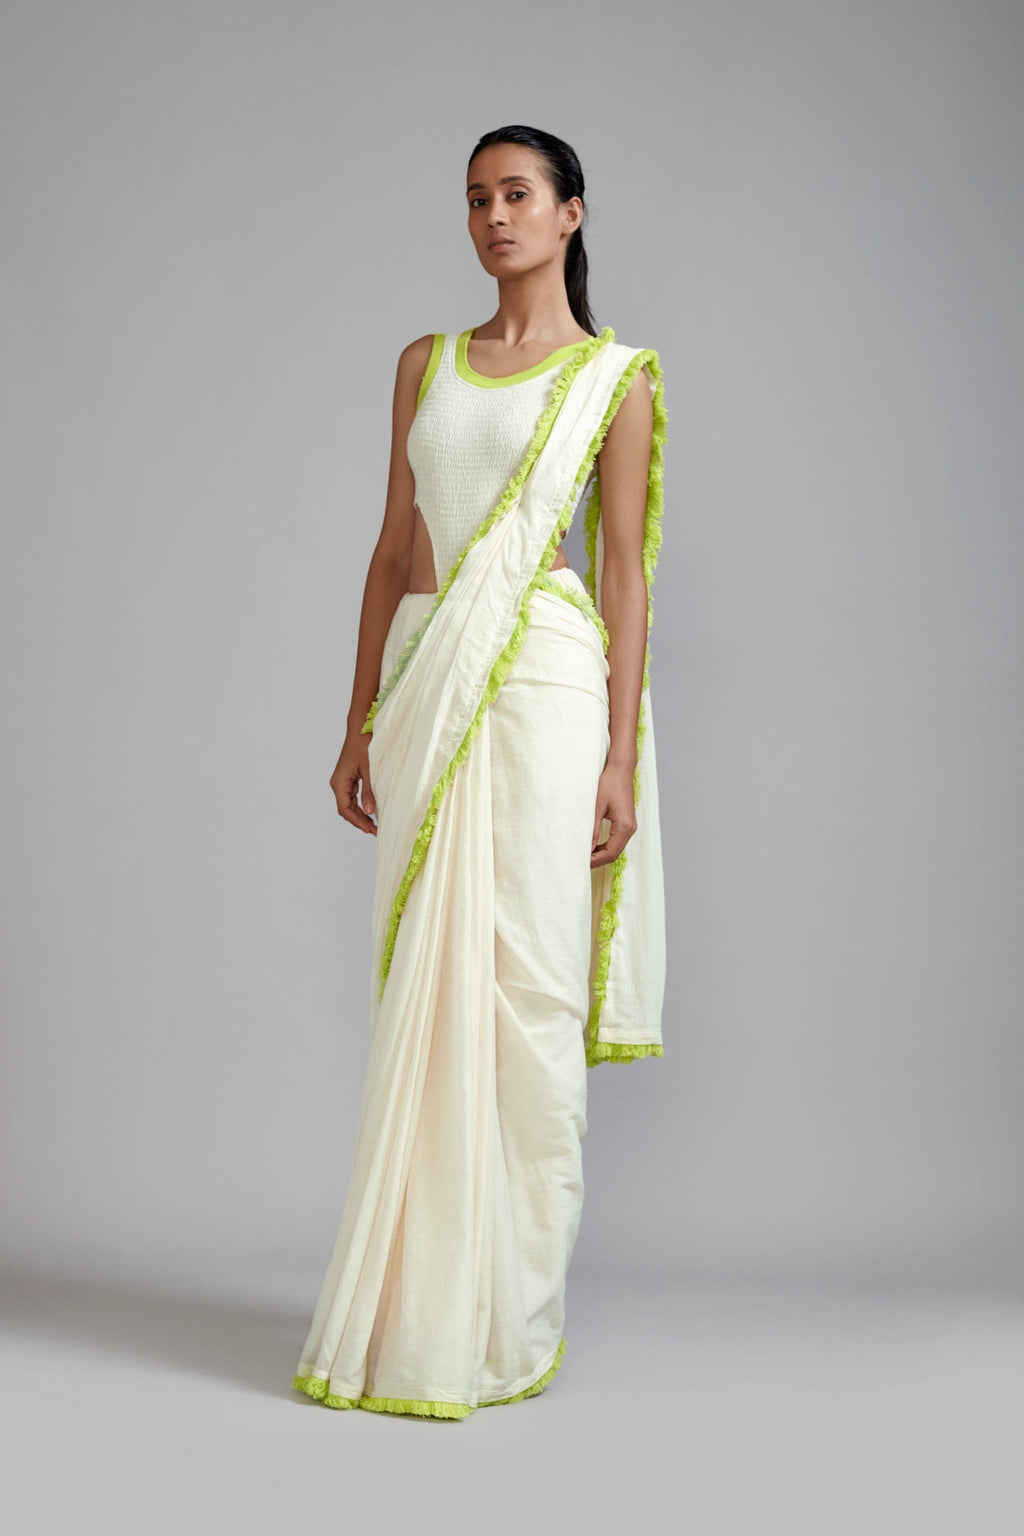 Mati Outfit Sets XS Off-White with Neon Green Saree & Smocked Bodysuit Set (2 PCS)